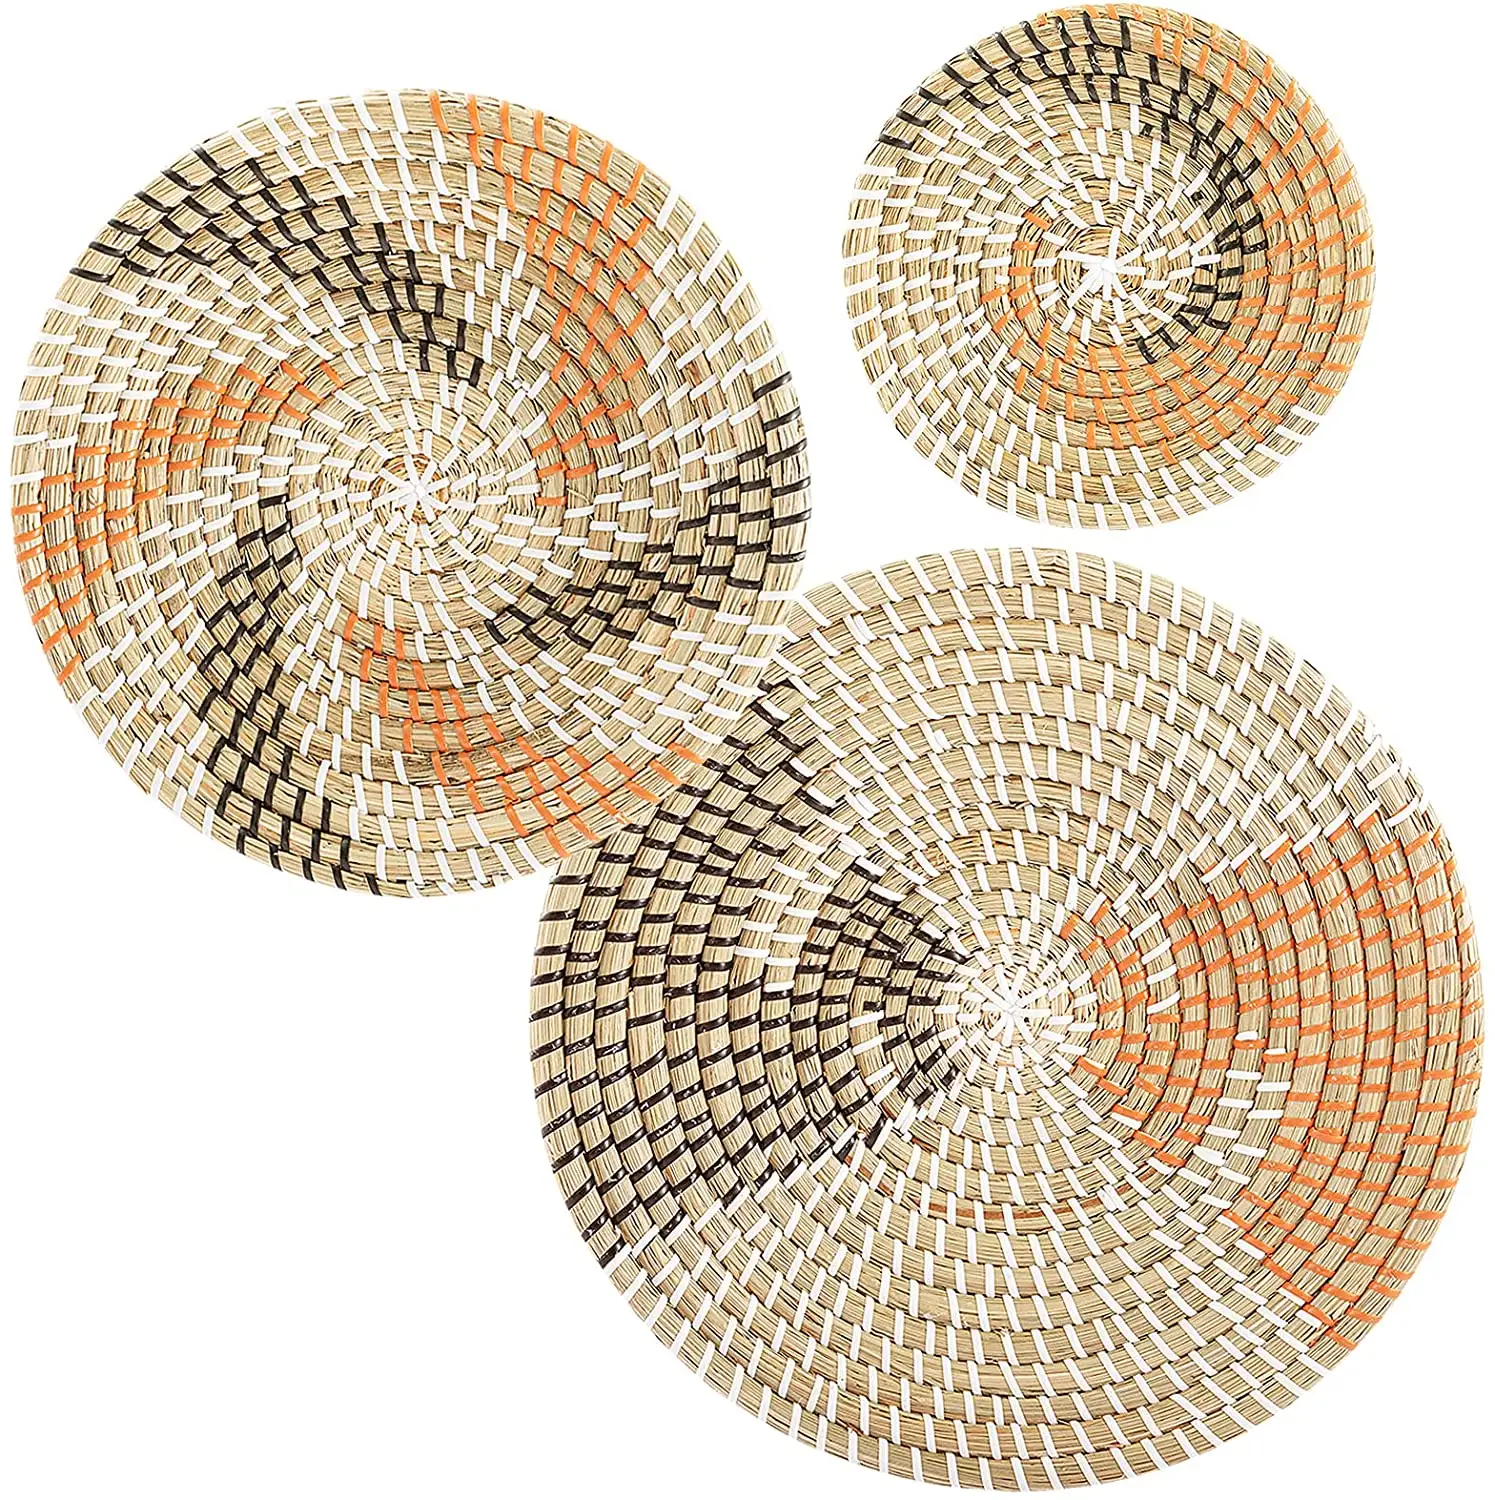 3 seagrass baskets handmade wall hanging art living room decoration natural vintage style